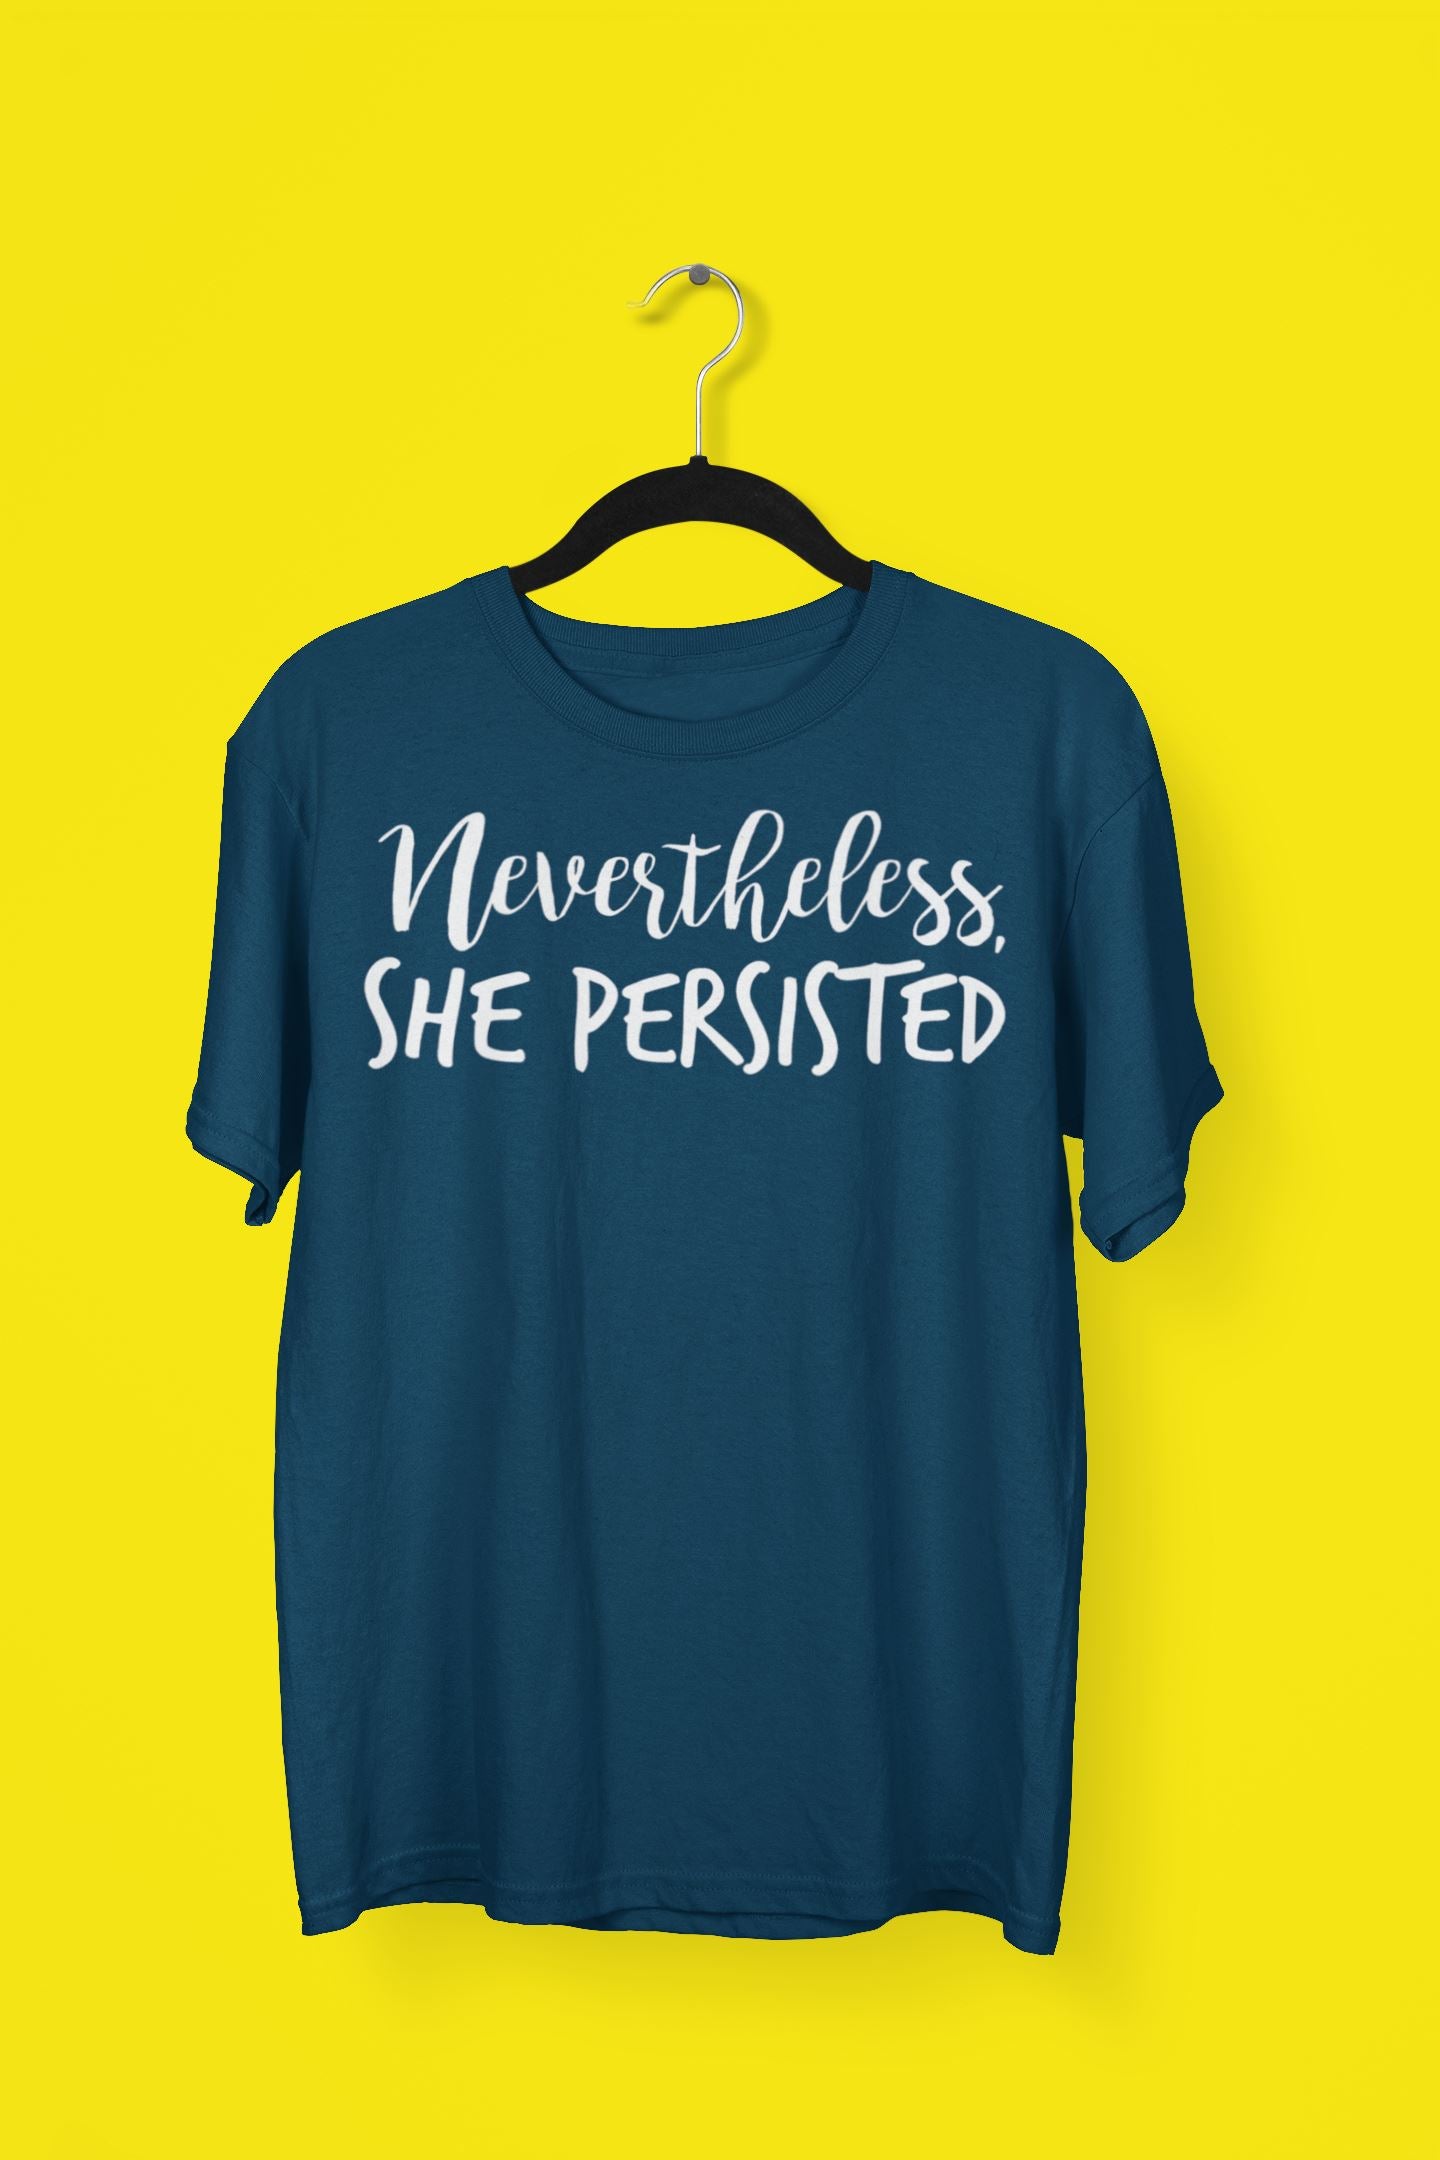 Nevertheless She Persisted Exclusive Female Empowerment T Shirt for Women freeshipping - Catch My Drift India